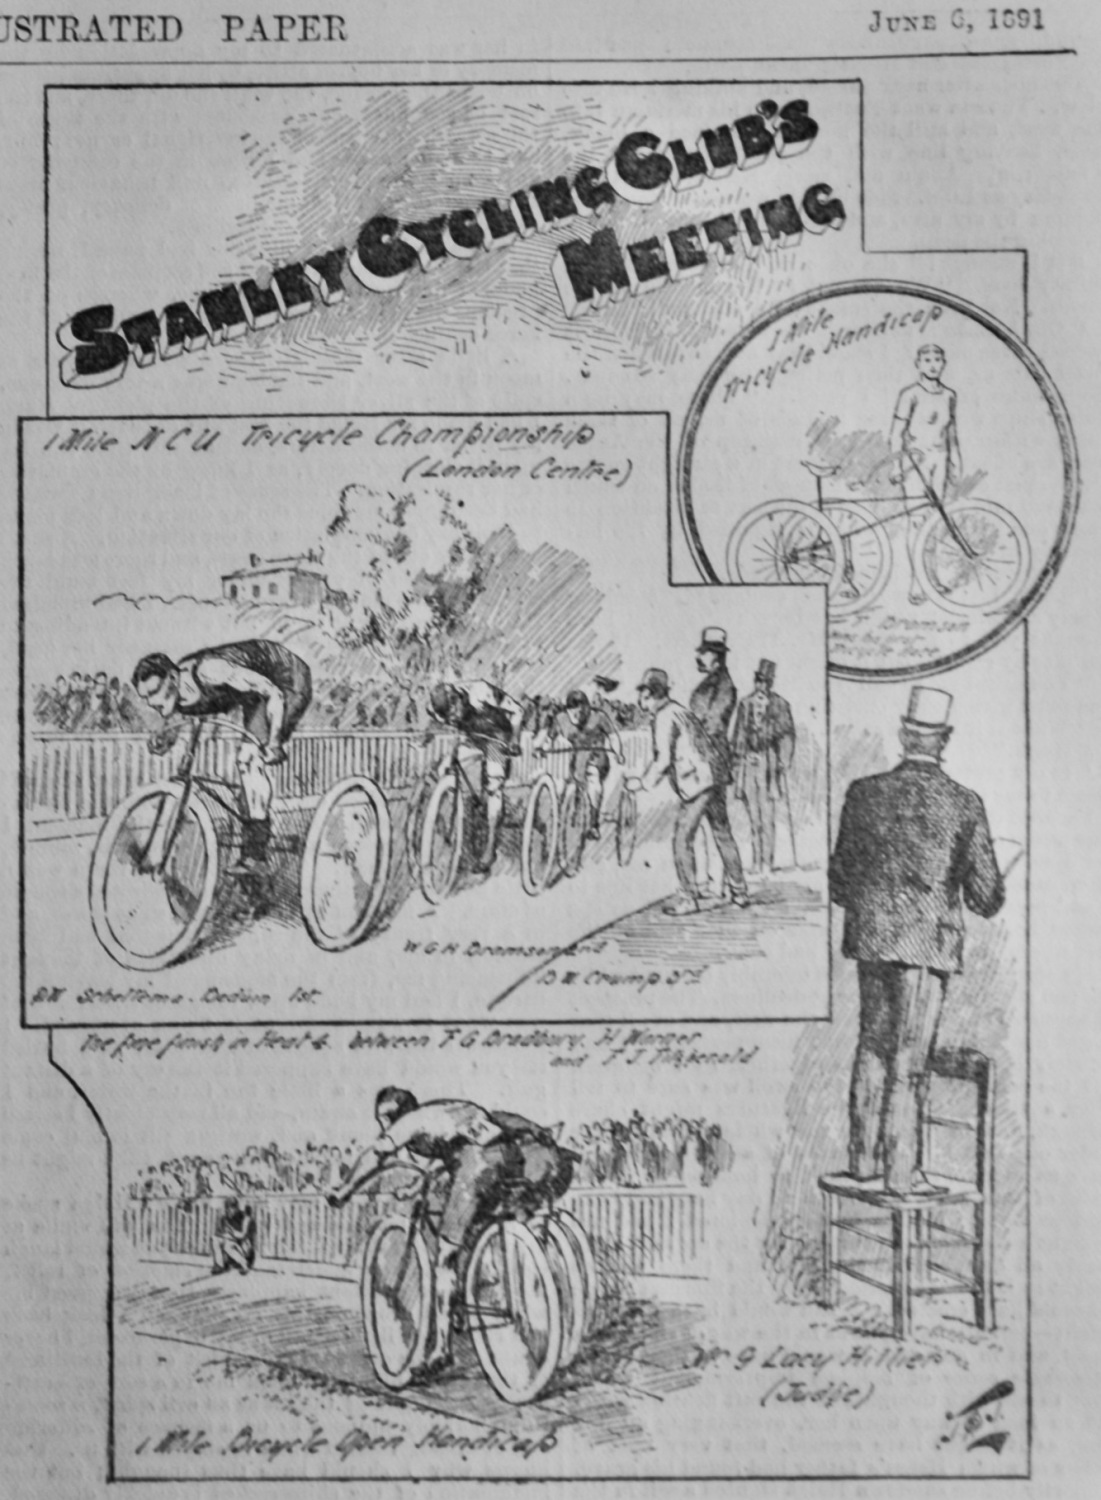 Stanley Cycling Club's Meeting.  1891.